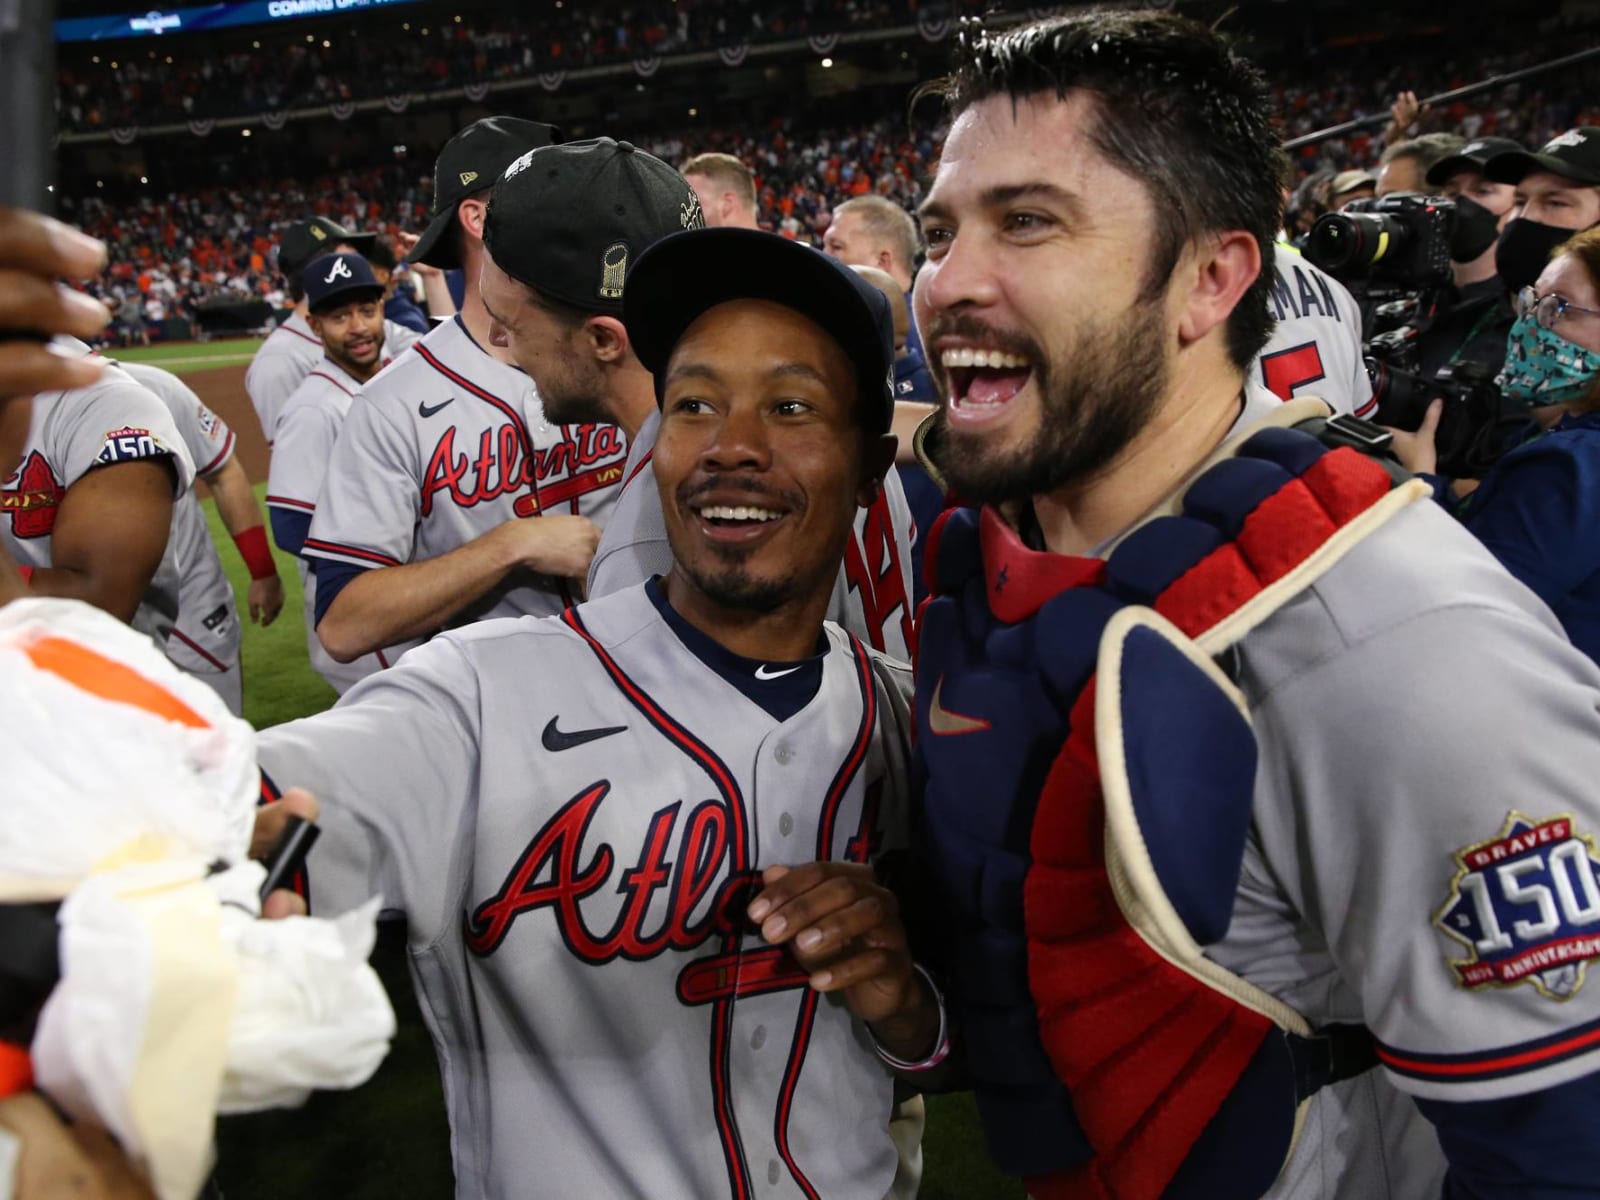 Braves win first World Series since 1995, defeating Astros in Game